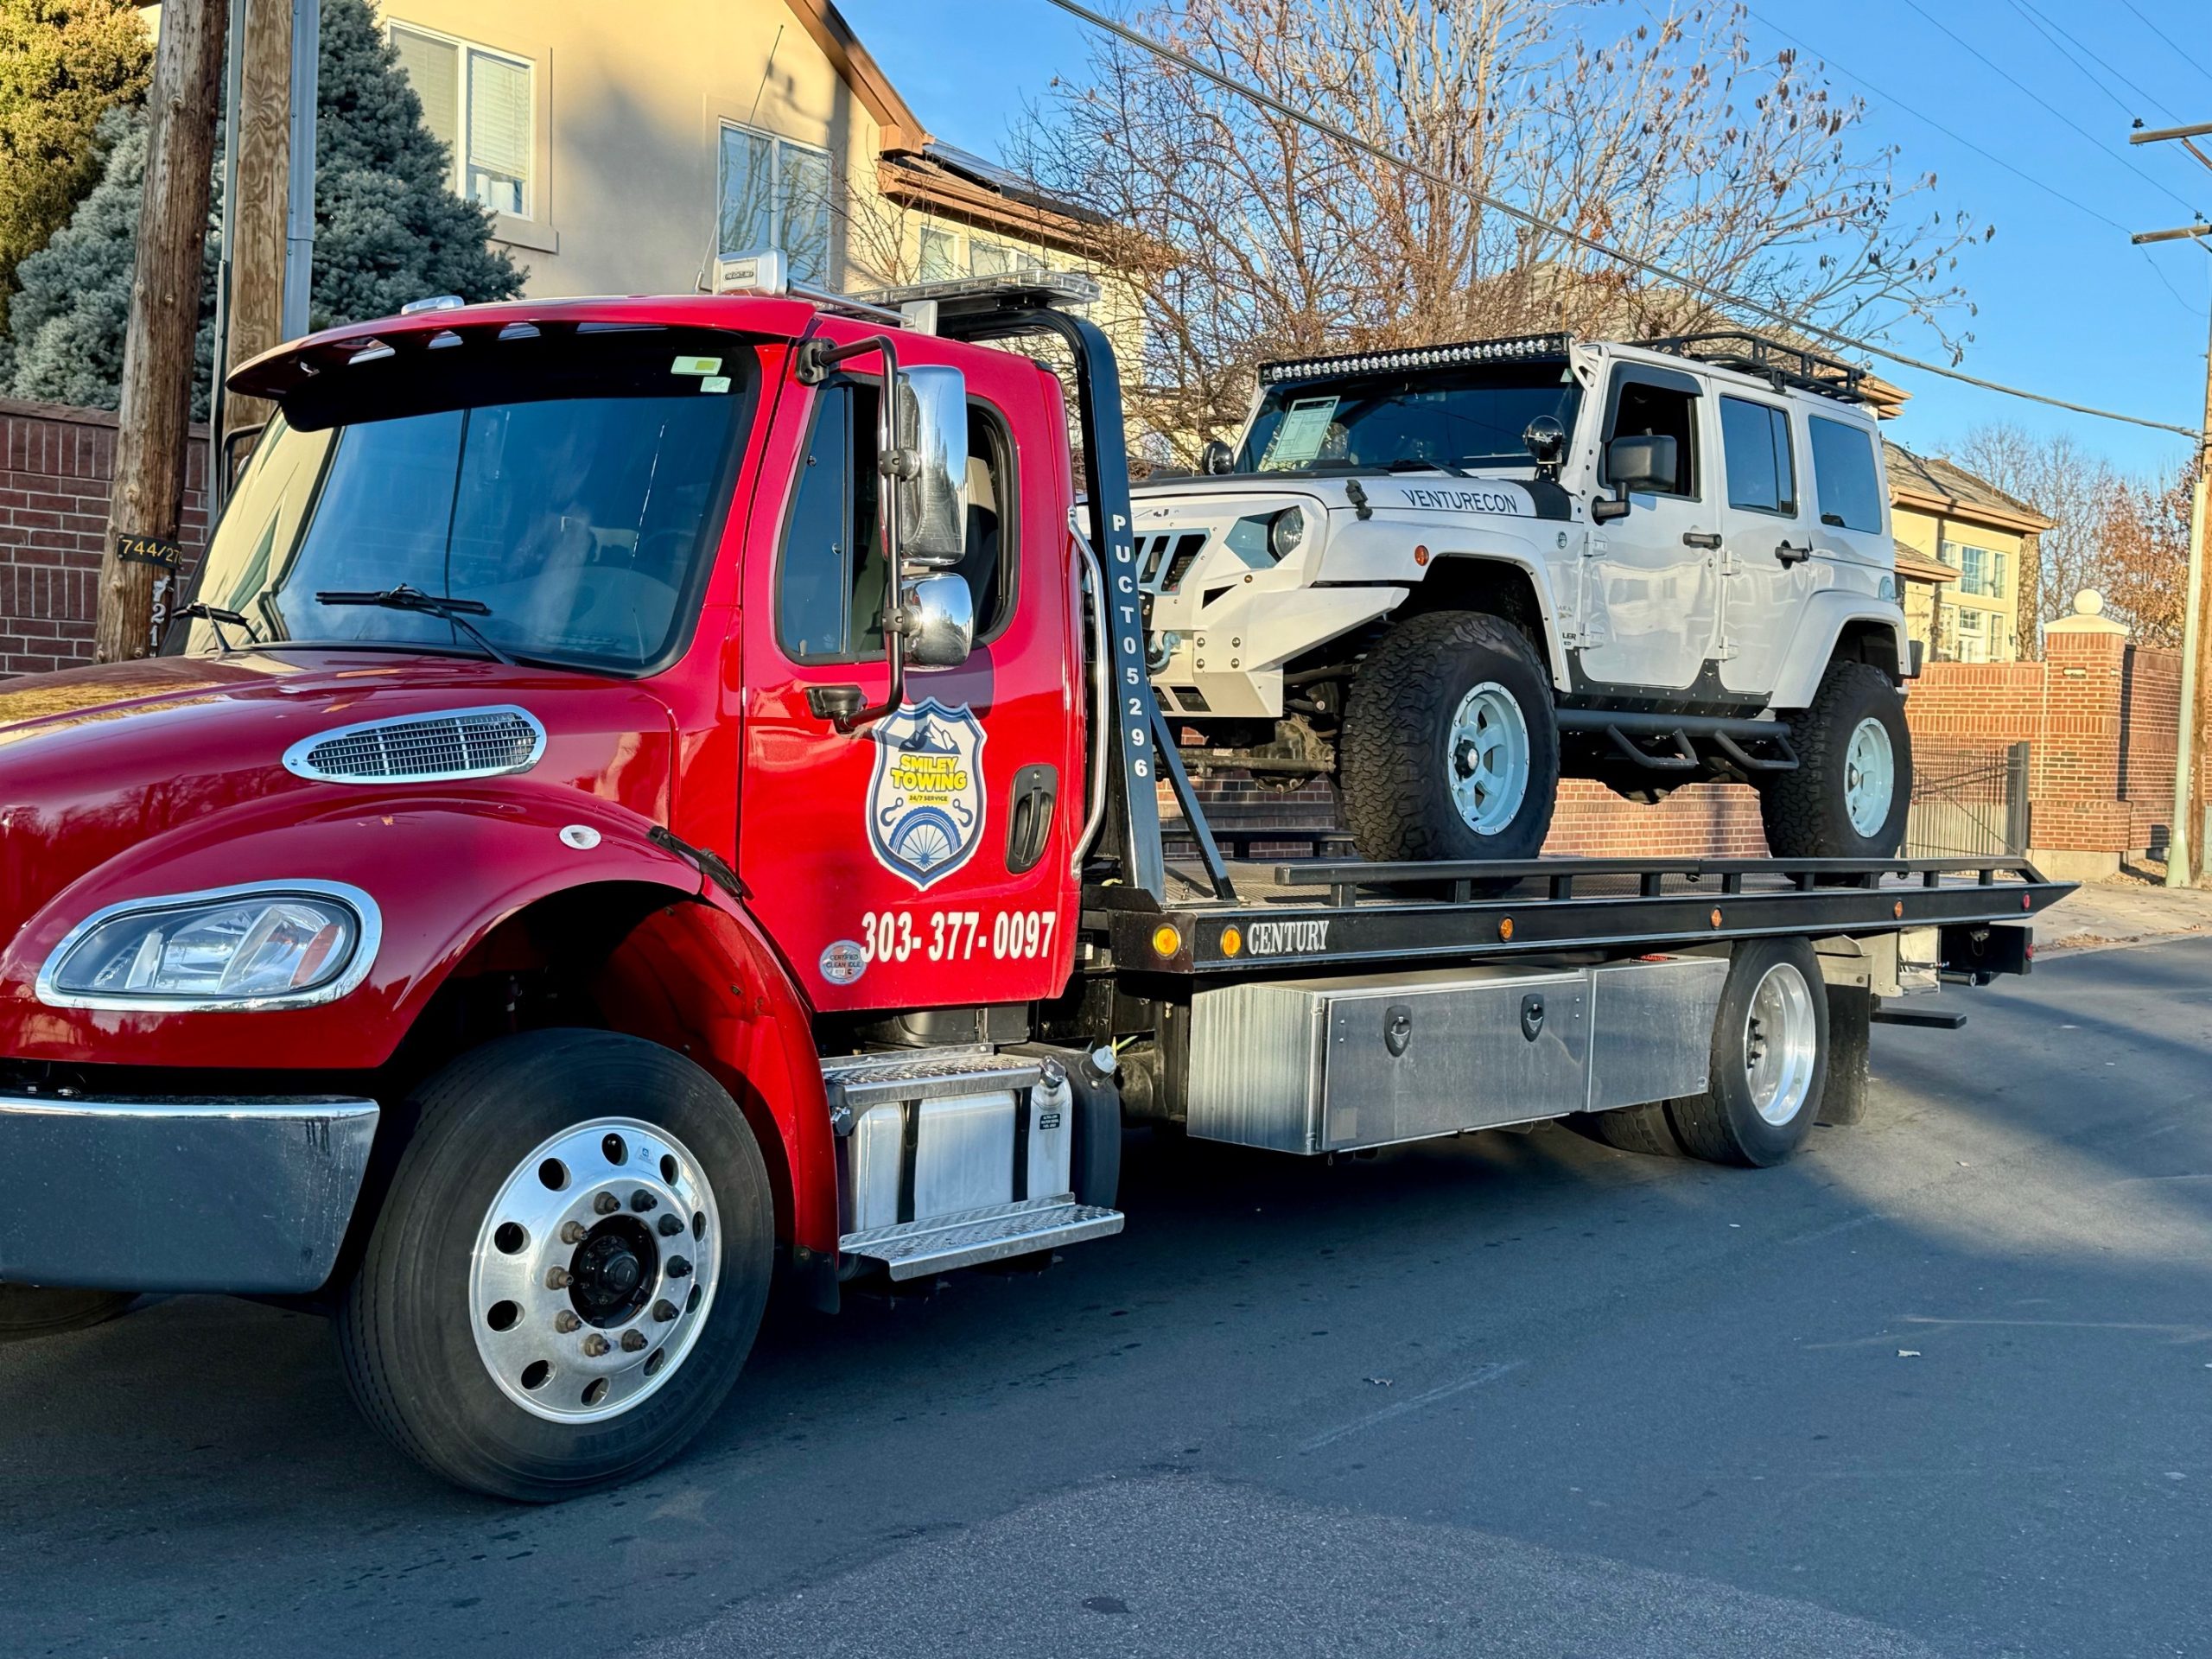 this image shows towing services in Denver, CO